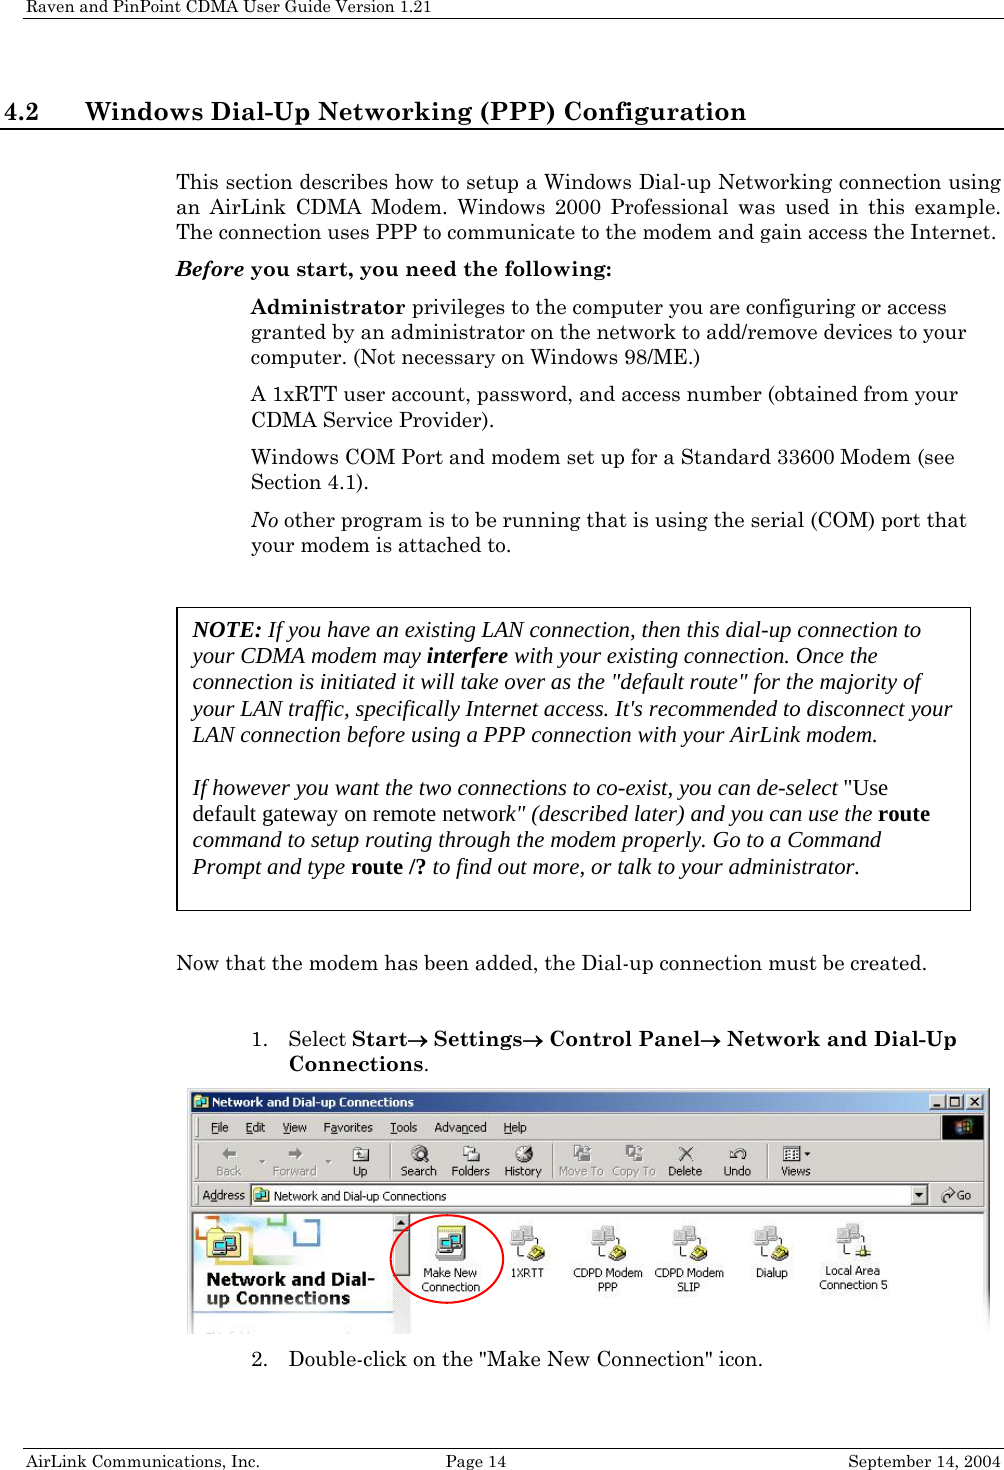 Raven and PinPoint CDMA User Guide Version 1.21 4.2 Windows Dial-Up Networking (PPP) Configuration  This section describes how to setup a Windows Dial-up Networking connection using an AirLink CDMA Modem. Windows 2000 Professional was used in this example. The connection uses PPP to communicate to the modem and gain access the Internet. Before you start, you need the following:  Administrator privileges to the computer you are configuring or access granted by an administrator on the network to add/remove devices to your computer. (Not necessary on Windows 98/ME.)  A 1xRTT user account, password, and access number (obtained from your CDMA Service Provider).  Windows COM Port and modem set up for a Standard 33600 Modem (see Section 4.1).  No other program is to be running that is using the serial (COM) port that your modem is attached to.    Now that the modem has been added, the Dial-up connection must be created.  NOTE: If you have an existing LAN connection, then this dial-up connection to your CDMA modem may interfere with your existing connection. Once the connection is initiated it will take over as the &quot;default route&quot; for the majority of your LAN traffic, specifically Internet access. It&apos;s recommended to disconnect your LAN connection before using a PPP connection with your AirLink modem.  If however you want the two connections to co-exist, you can de-select &quot;Use default gateway on remote network&quot; (described later) and you can use the route command to setup routing through the modem properly. Go to a Command Prompt and type route /? to find out more, or talk to your administrator. 1. Select Start→ Settings→ Control Panel→ Network and Dial-Up Connections.  2. Double-click on the &quot;Make New Connection&quot; icon. AirLink Communications, Inc.  Page 14  September 14, 2004 